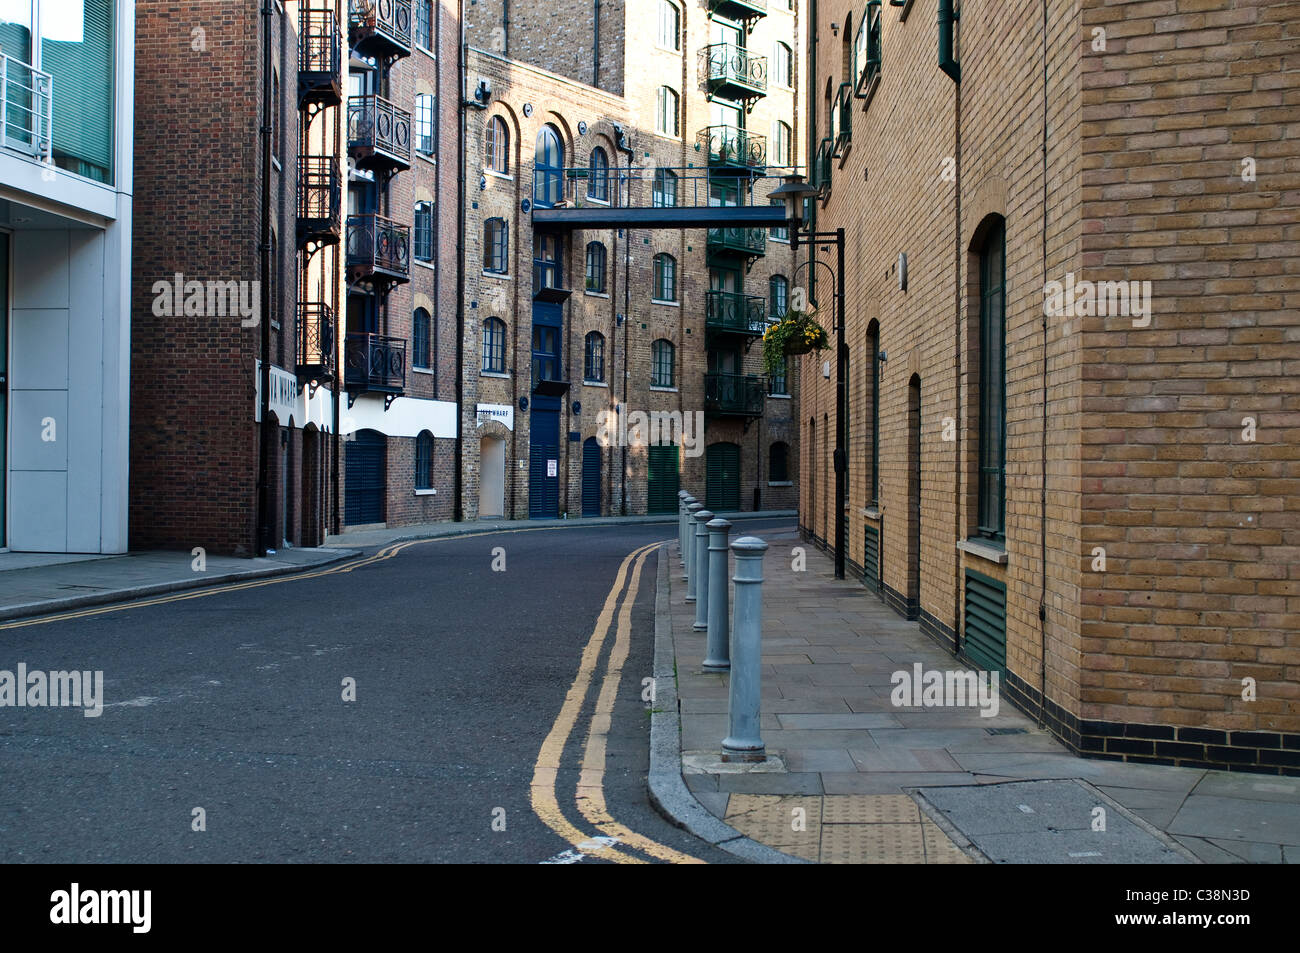 Old industrial buildings, now converted into flats, Shad Thames, SE1, London, UK Stock Photo